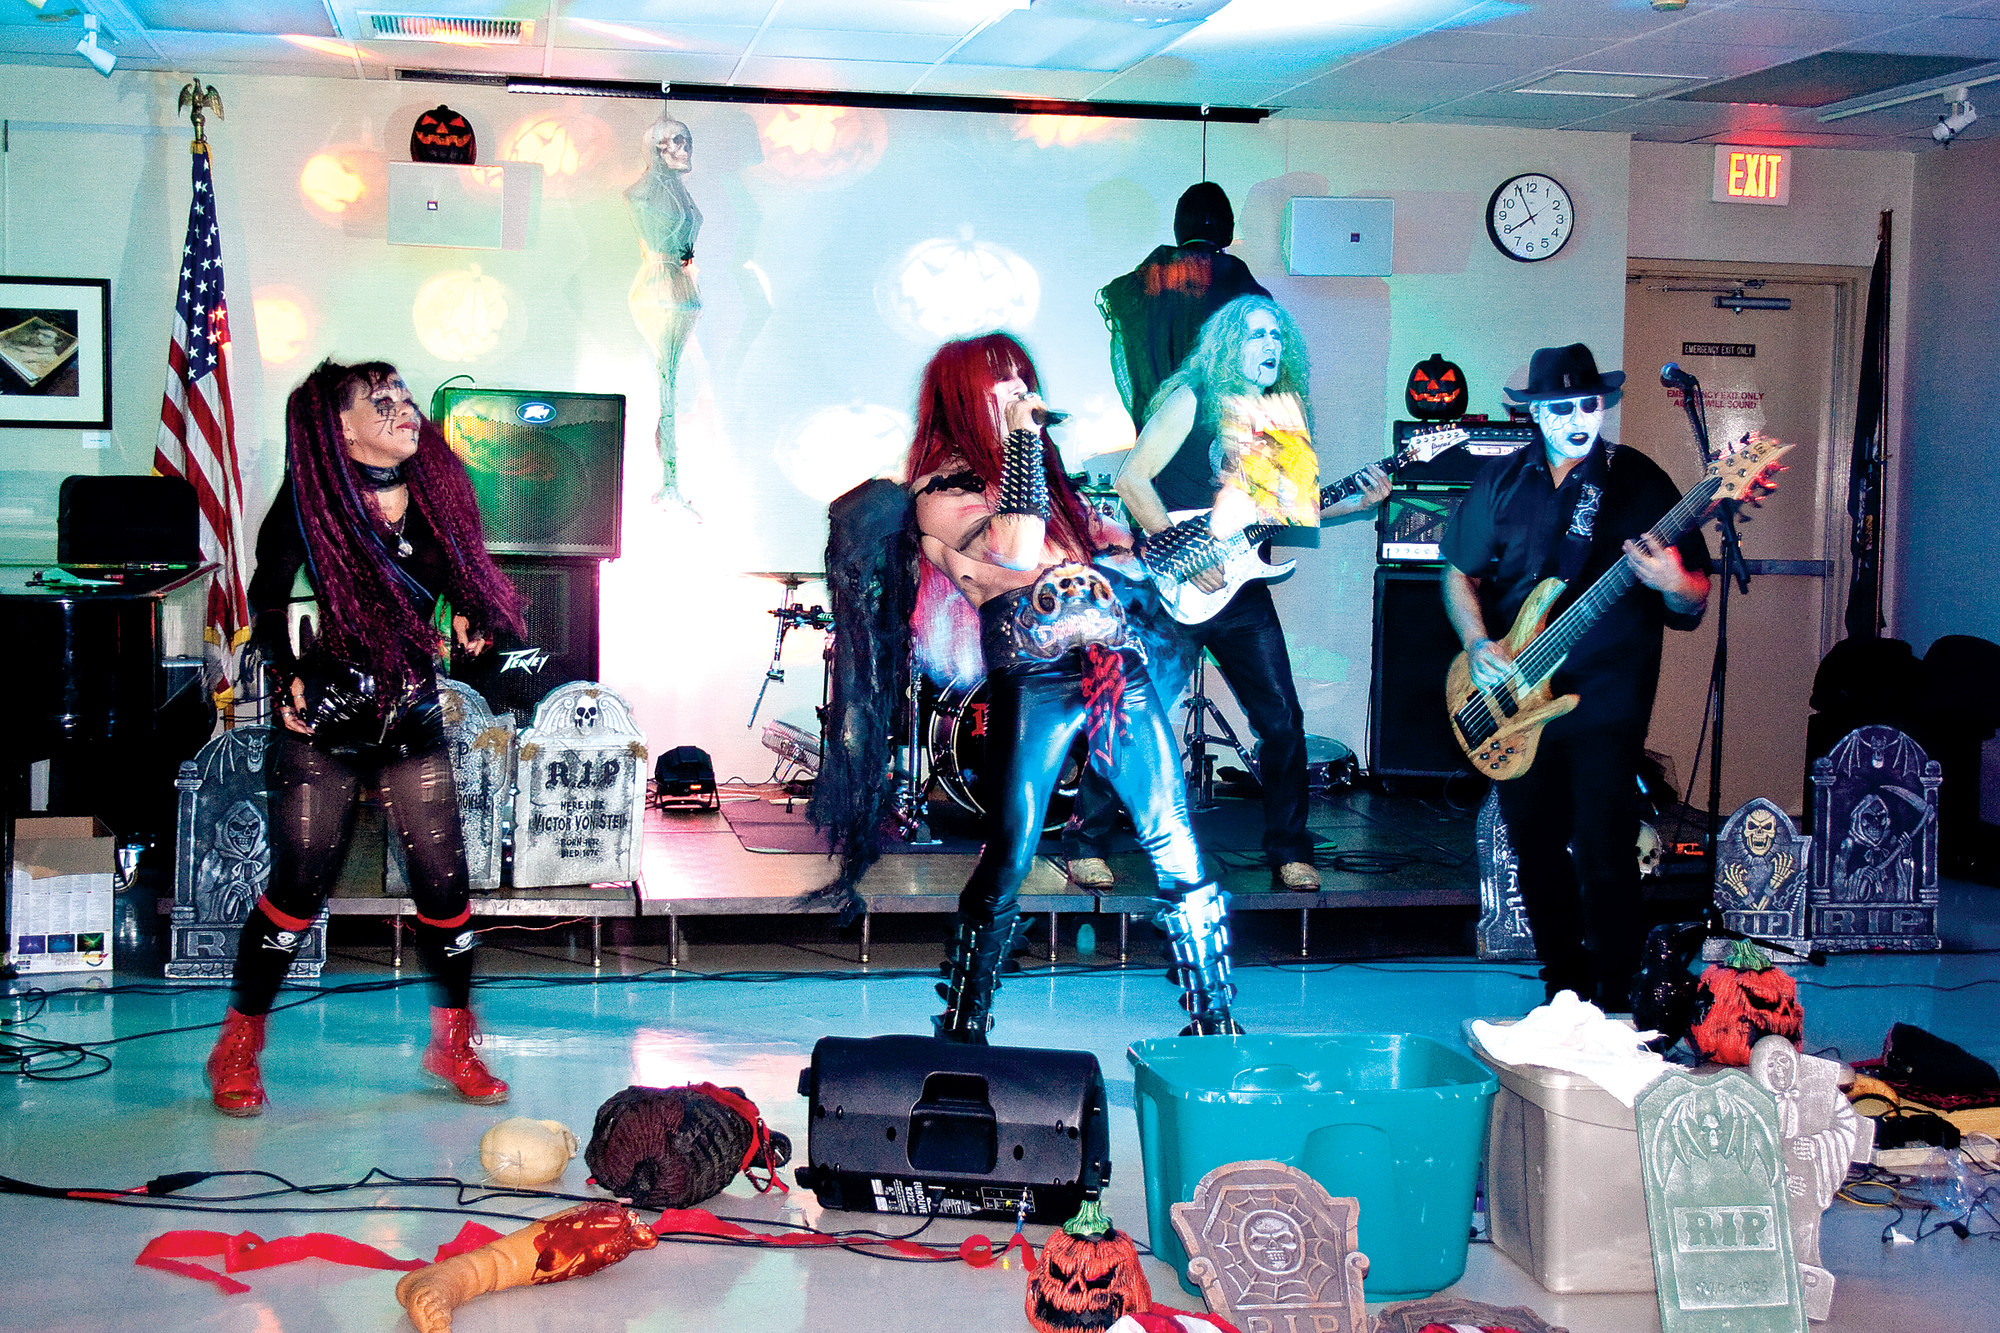 Demon Boy, a horror rock band, played spooky jams to set the mood for the East Meadow Public Library’s anime Halloween party last Friday.